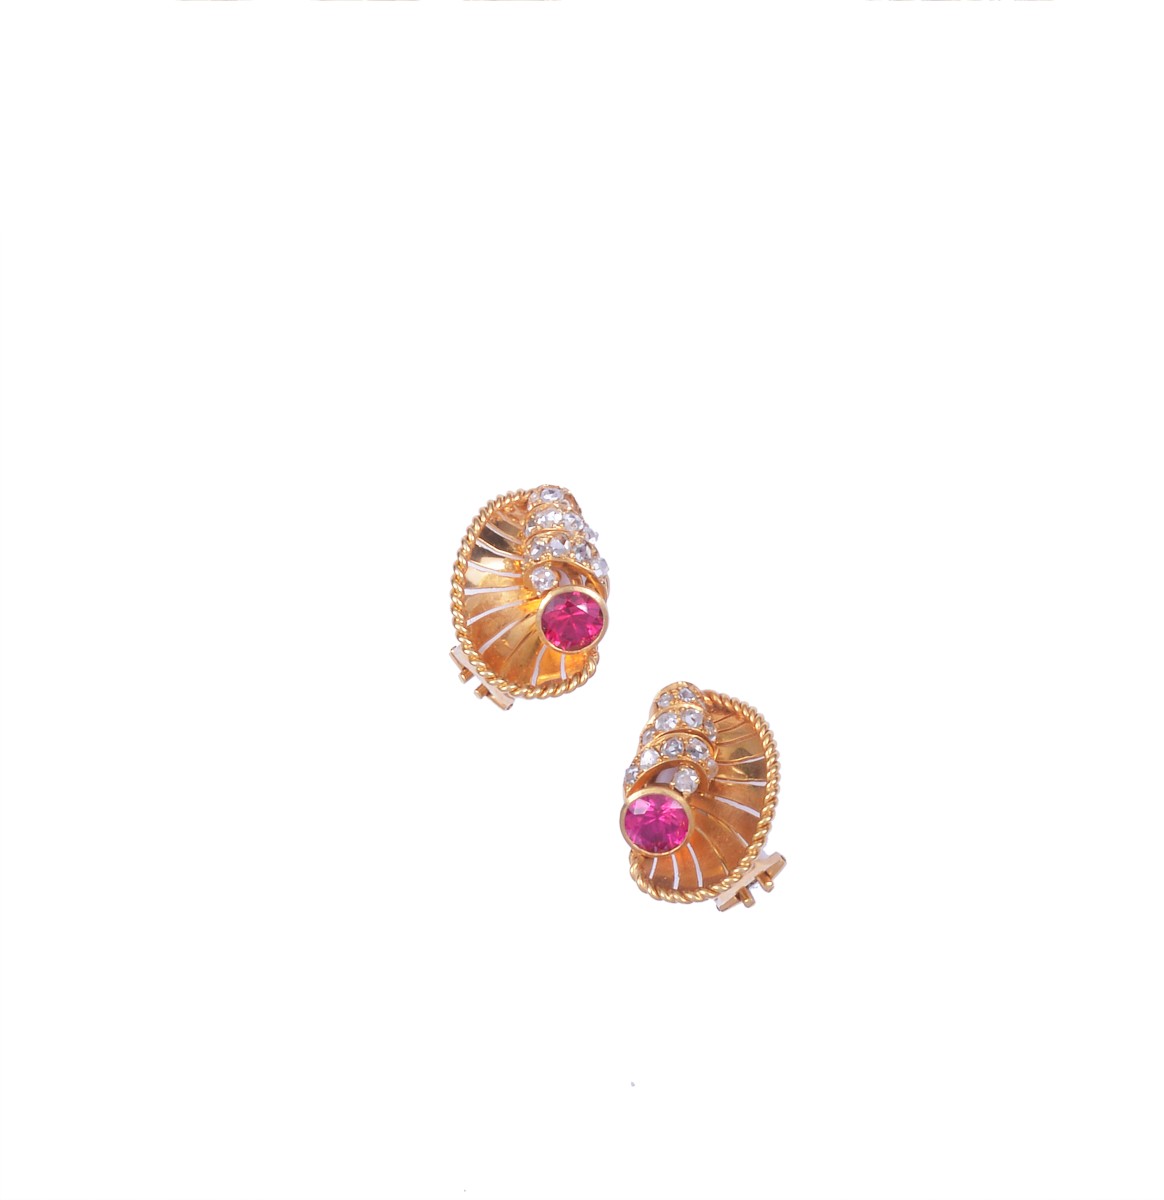 PAIR OF DIAMOND EARCLIPS of stylized shell design set with rose diamonds and circular simulant